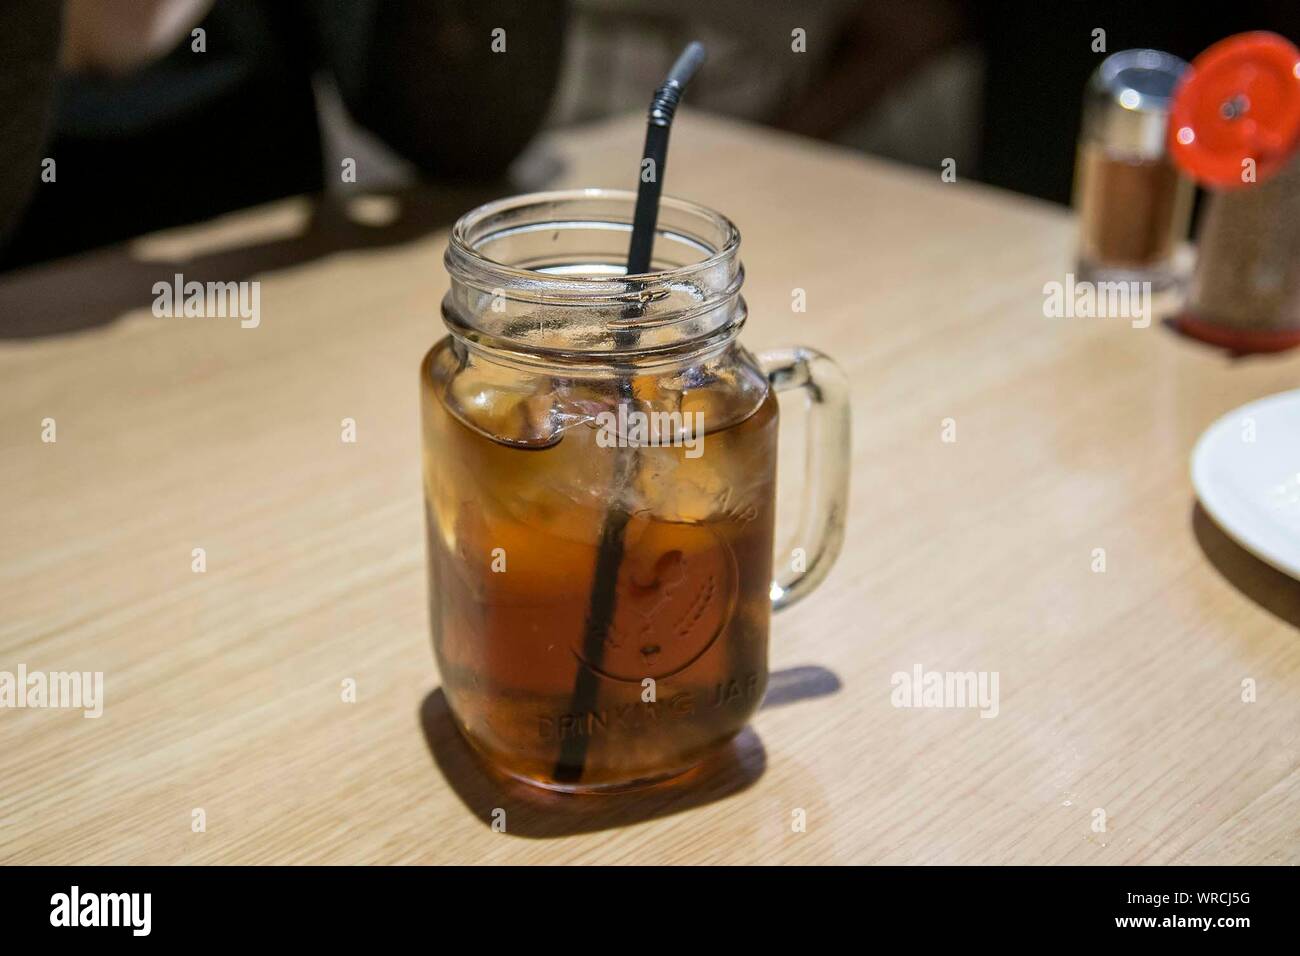 High Angle View Of Ice Tea With Lemon In Glass On Wooden Table Stock Photo